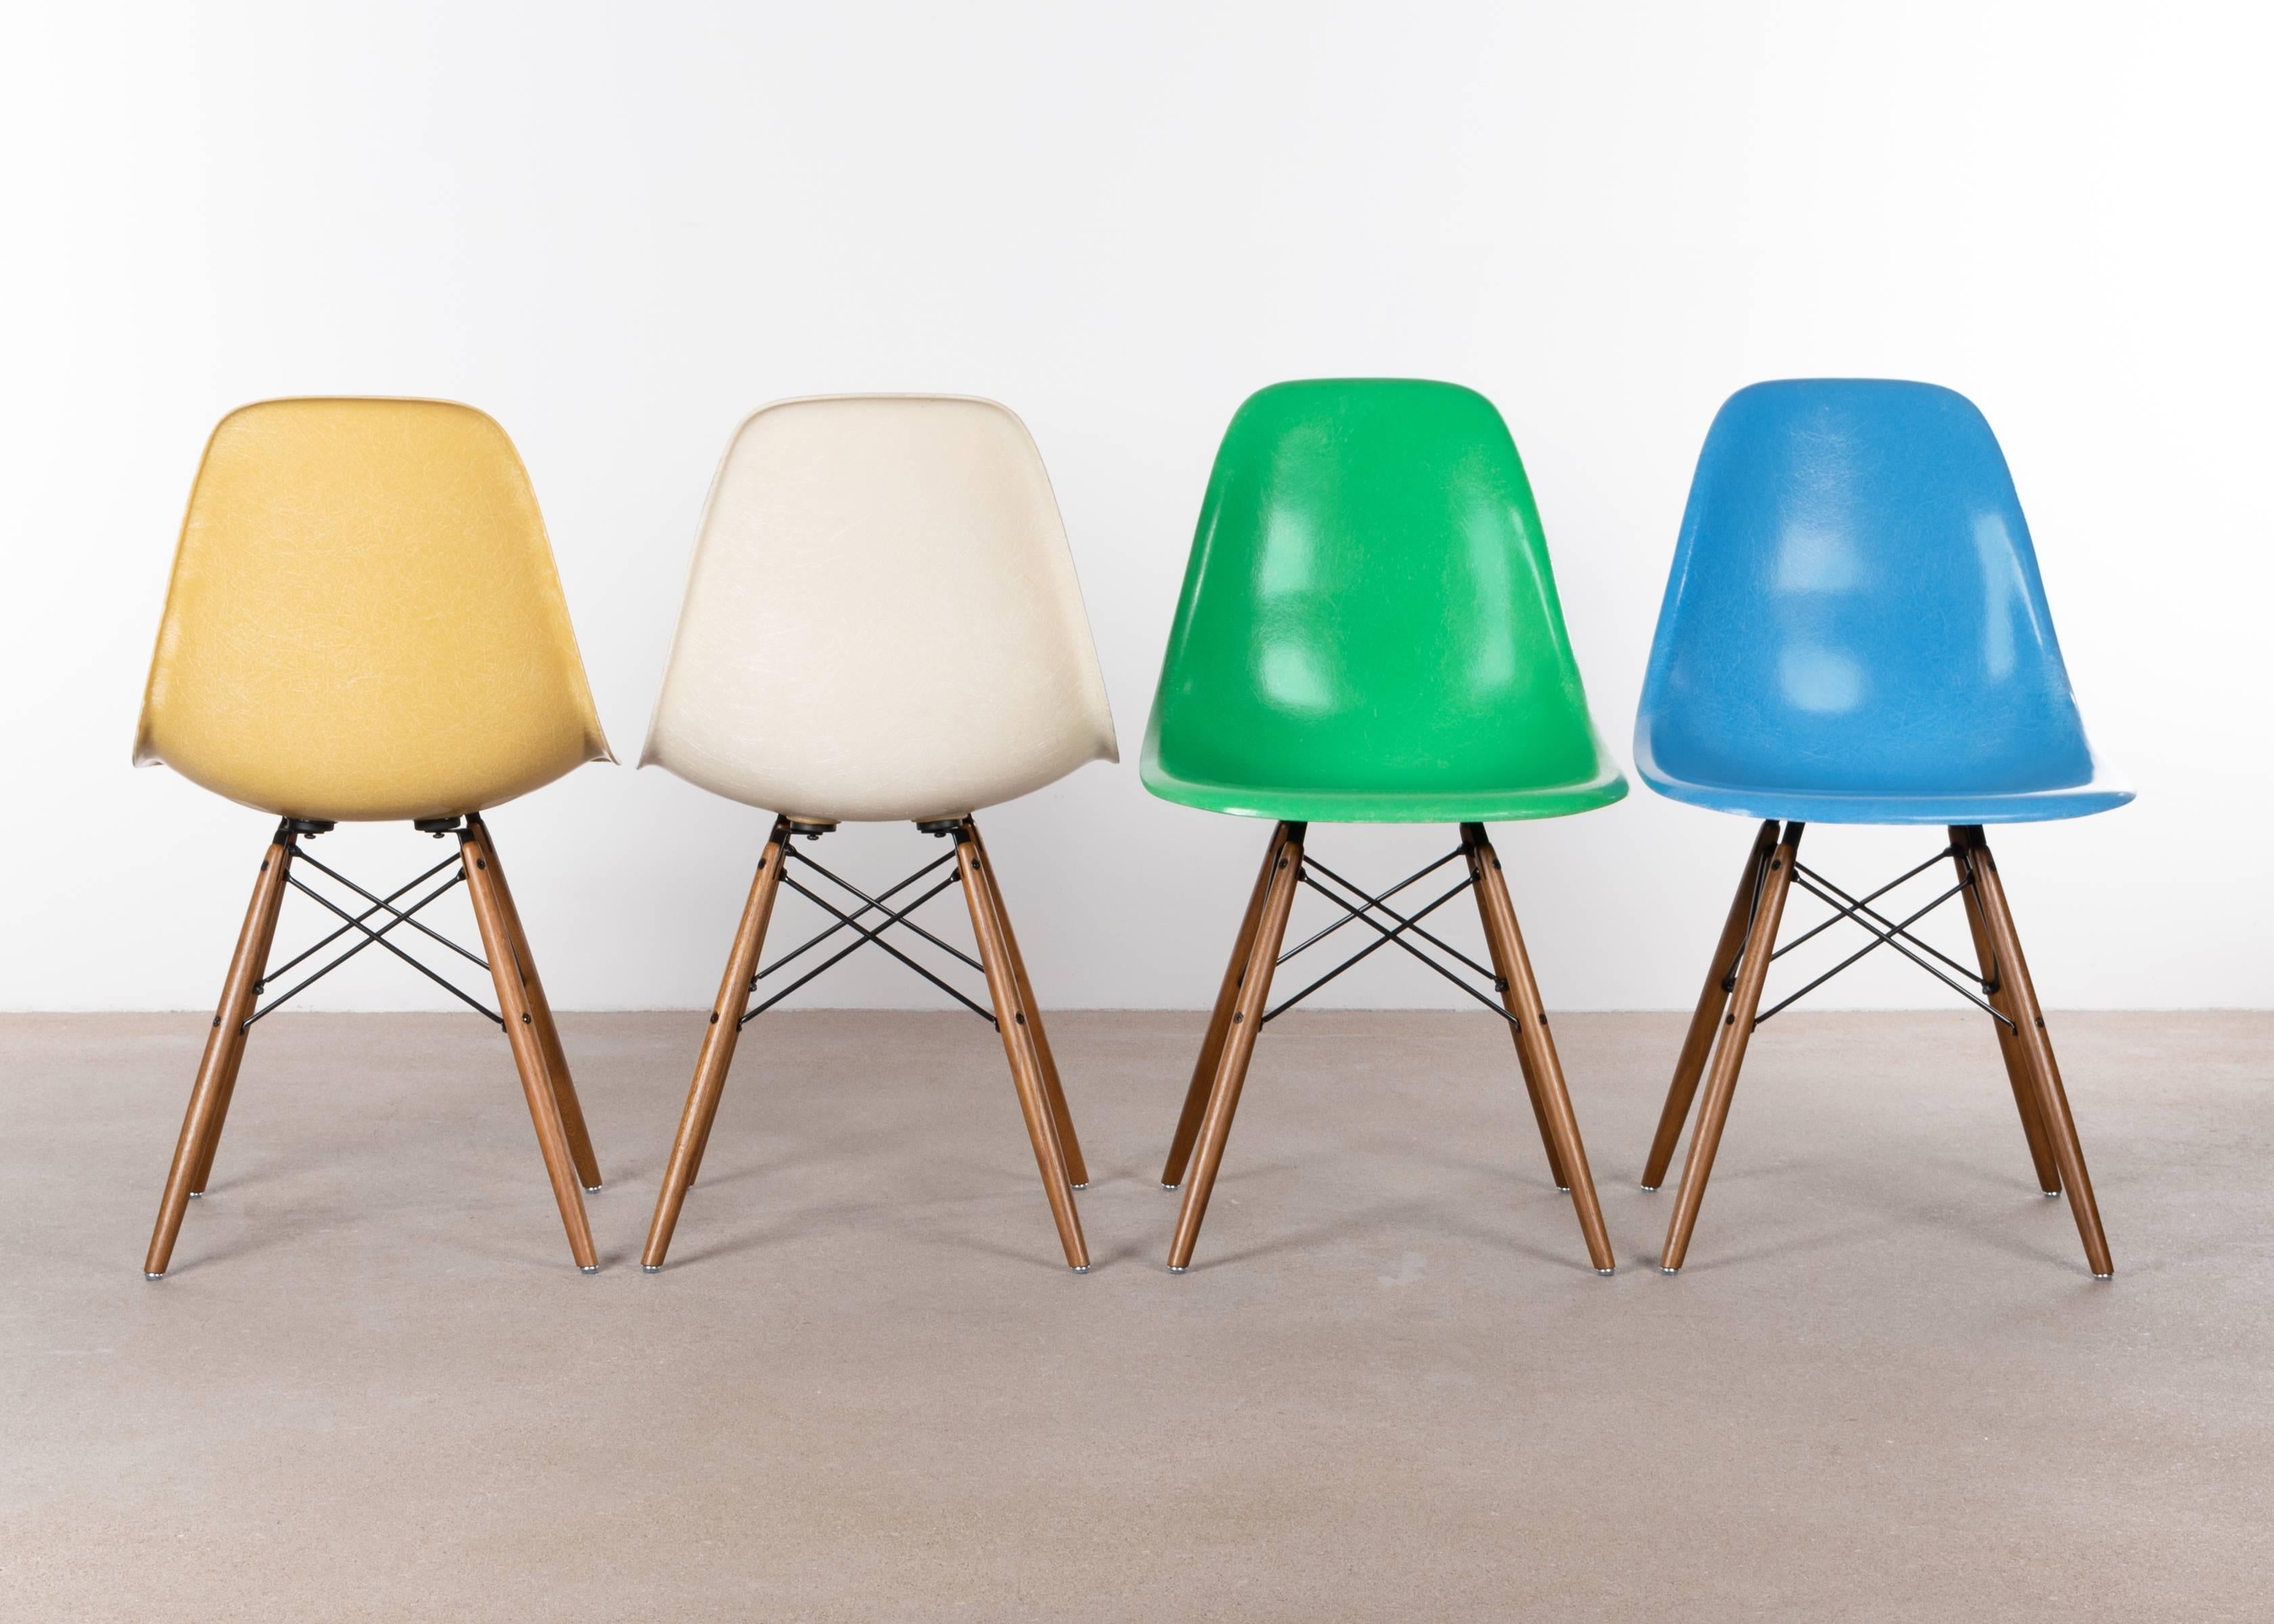 Beautiful iconic DSW chairs in colors: Ochre Light, Parchment, Cadmium Green and Turquoise.
Shells are in very good or excellent condition with only slight traces of use. Replaced shock mounts which guarantee save usability for the next decades.